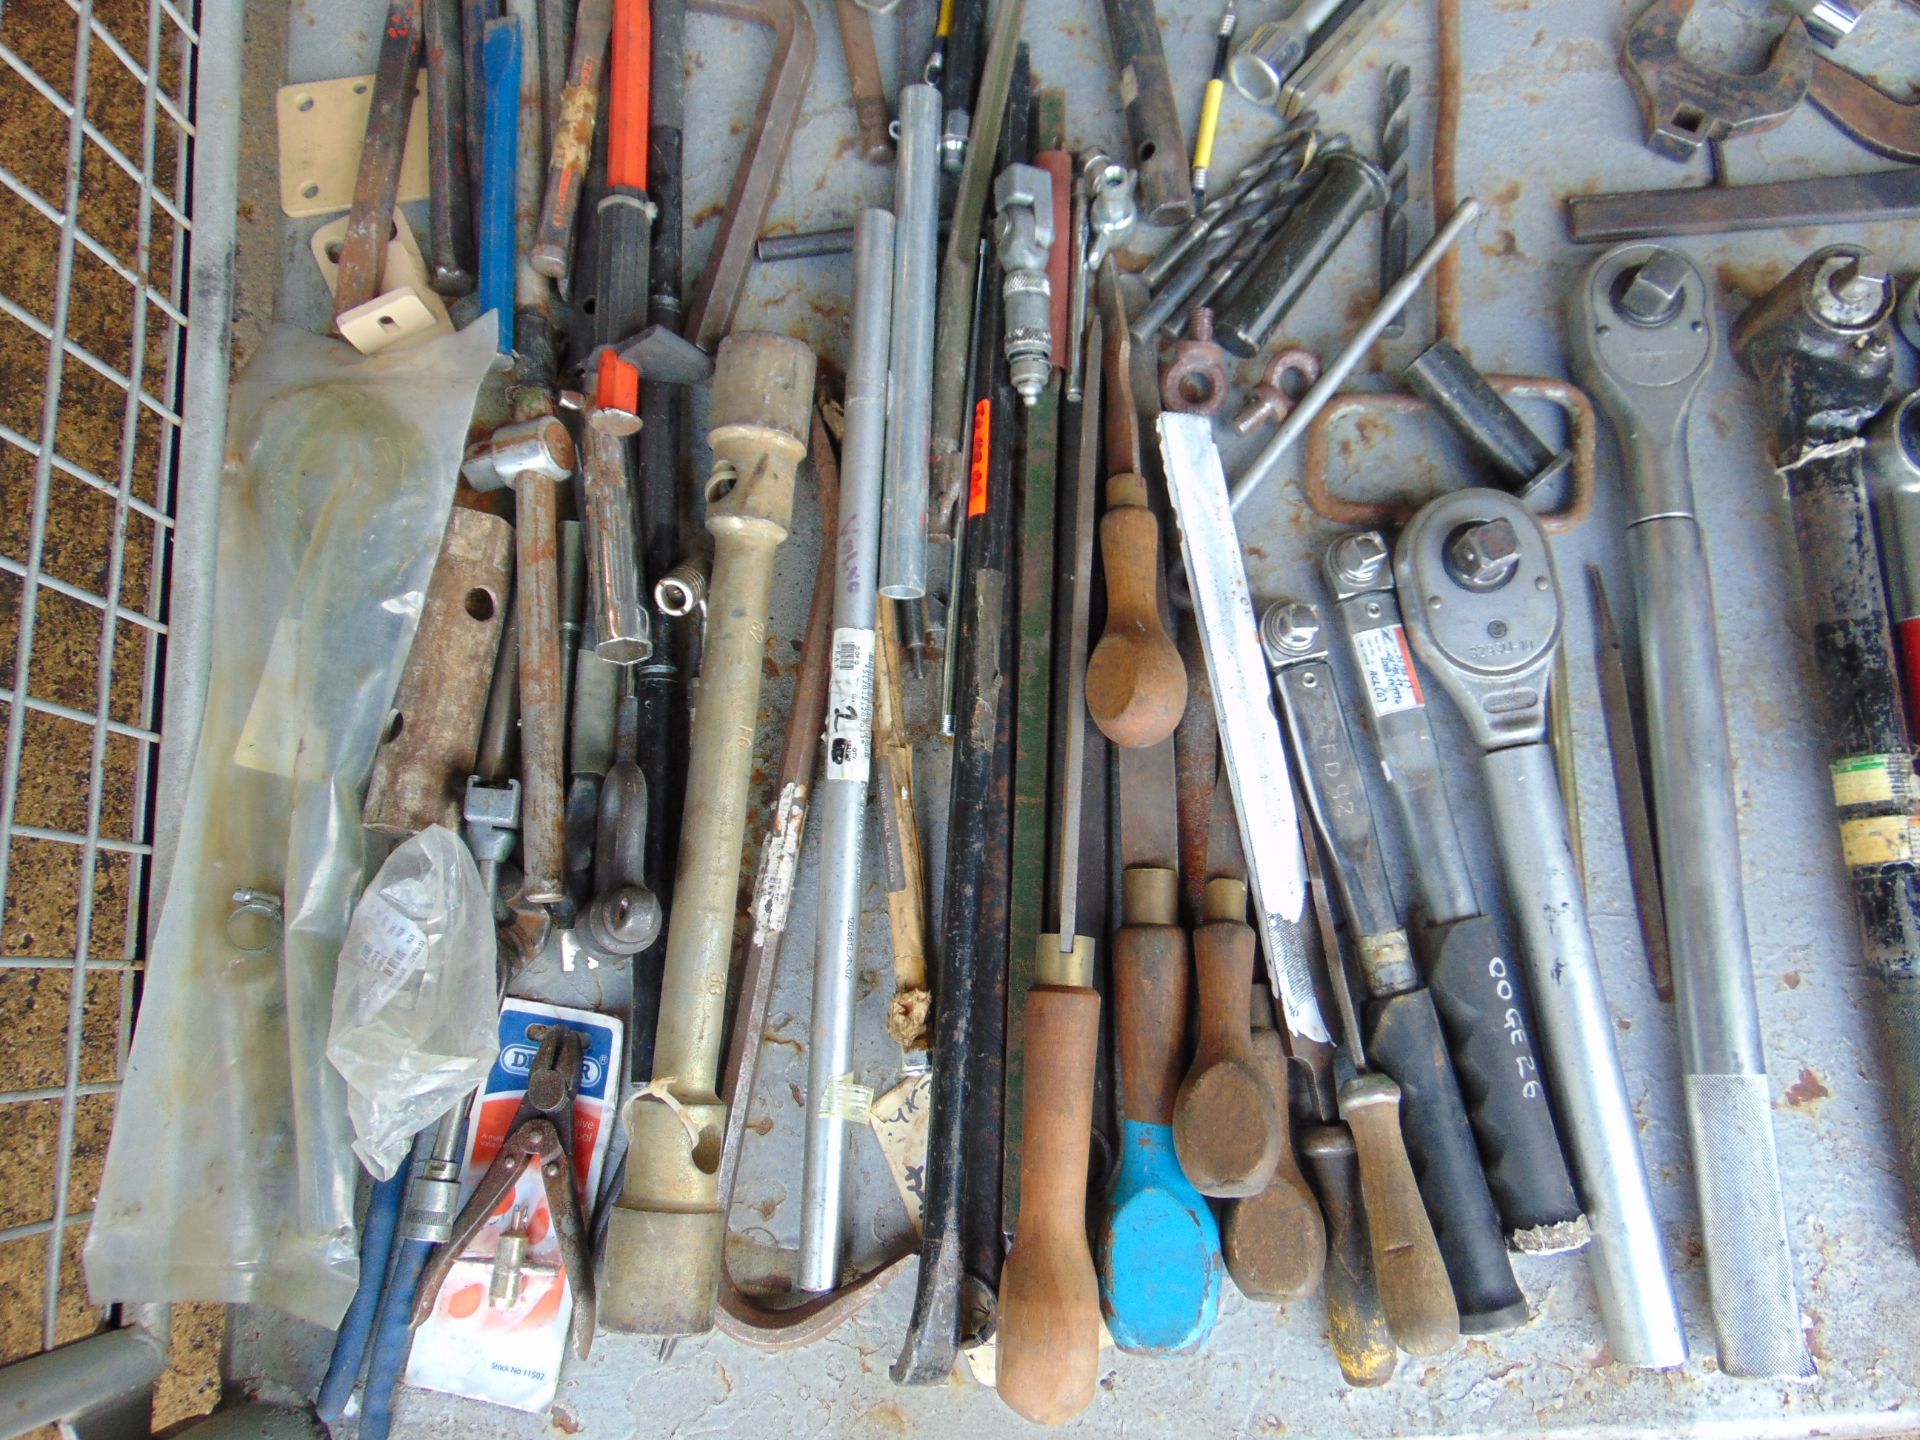 Stillage of Assorted Tools - Chisels, Files, Torque Wrench etc. - Image 6 of 6